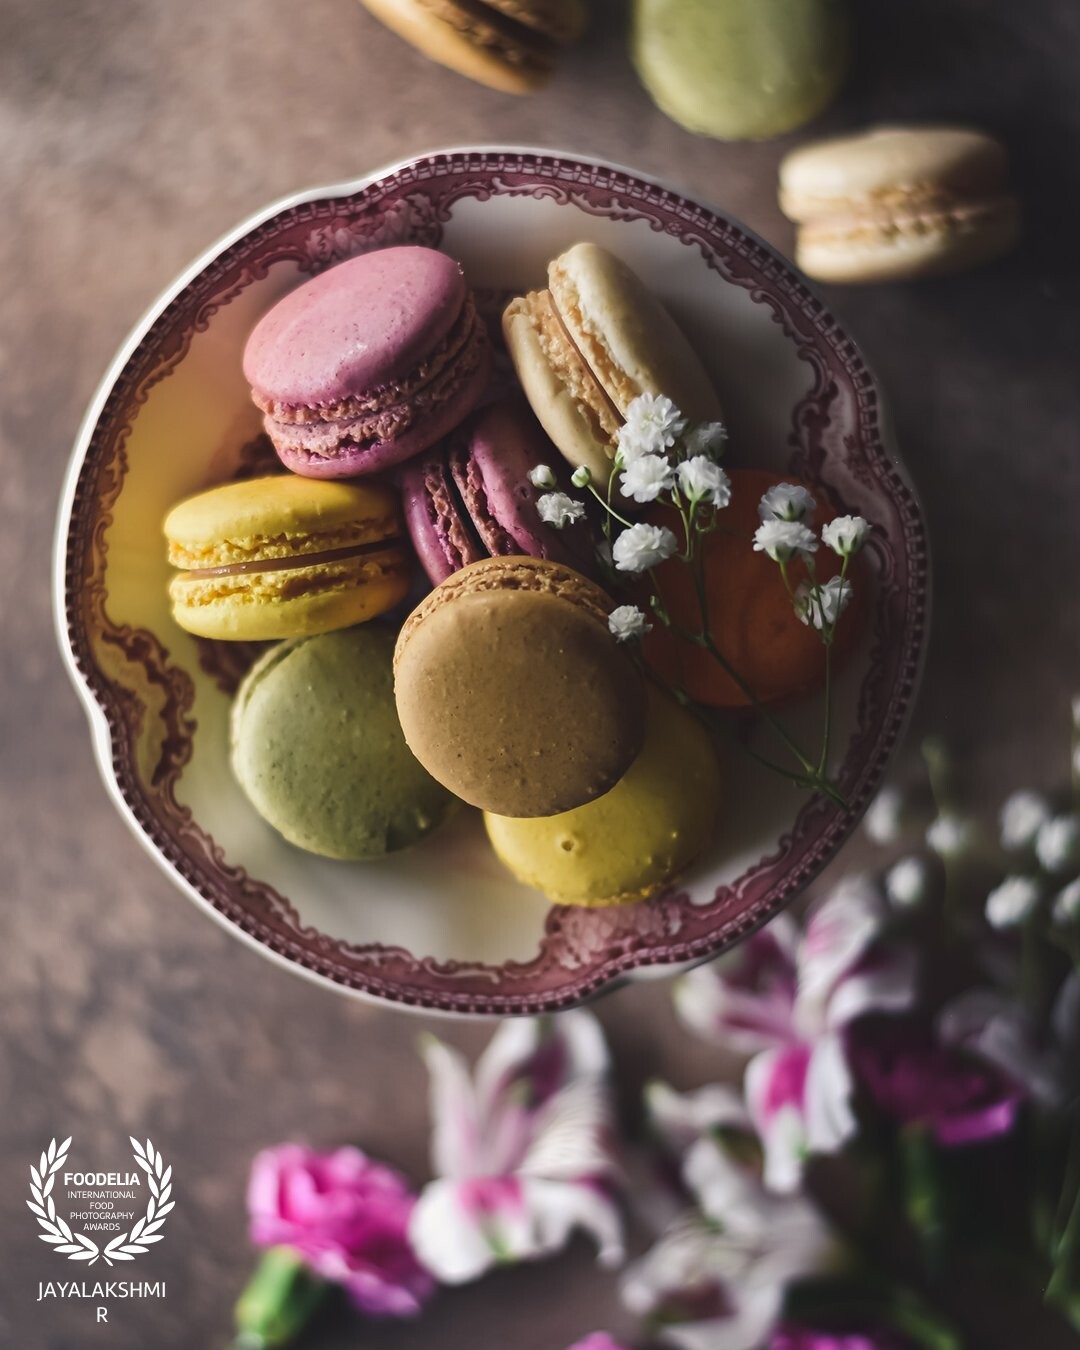 Colorful Macarons set amidst flowers . Shot  in natural light in a moody set up . Created some depth in  the frame by adding layers.